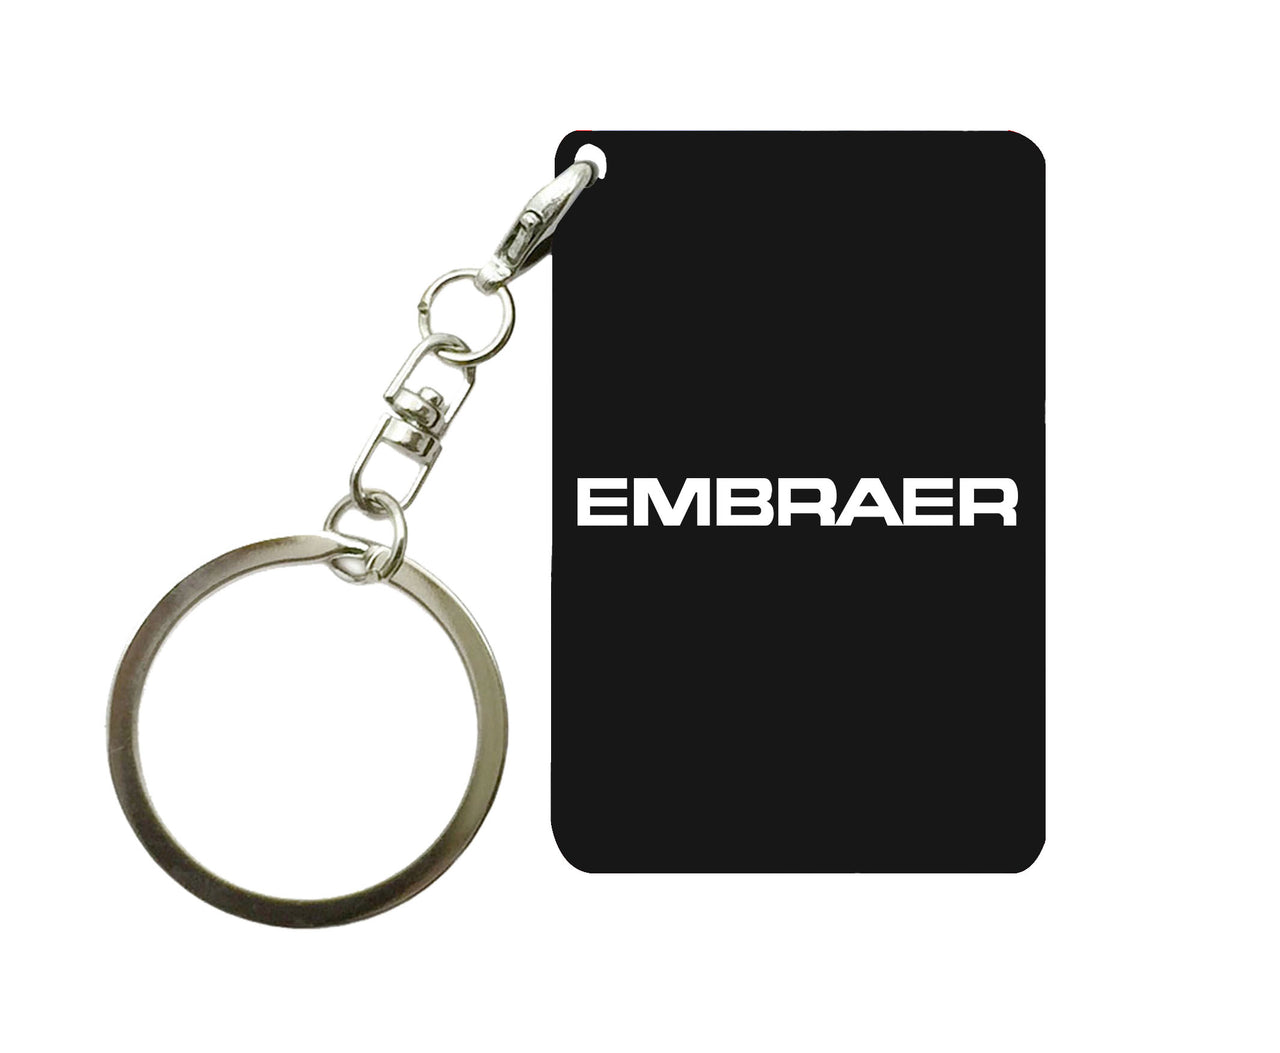 Embraer & Text Designed Key Chains